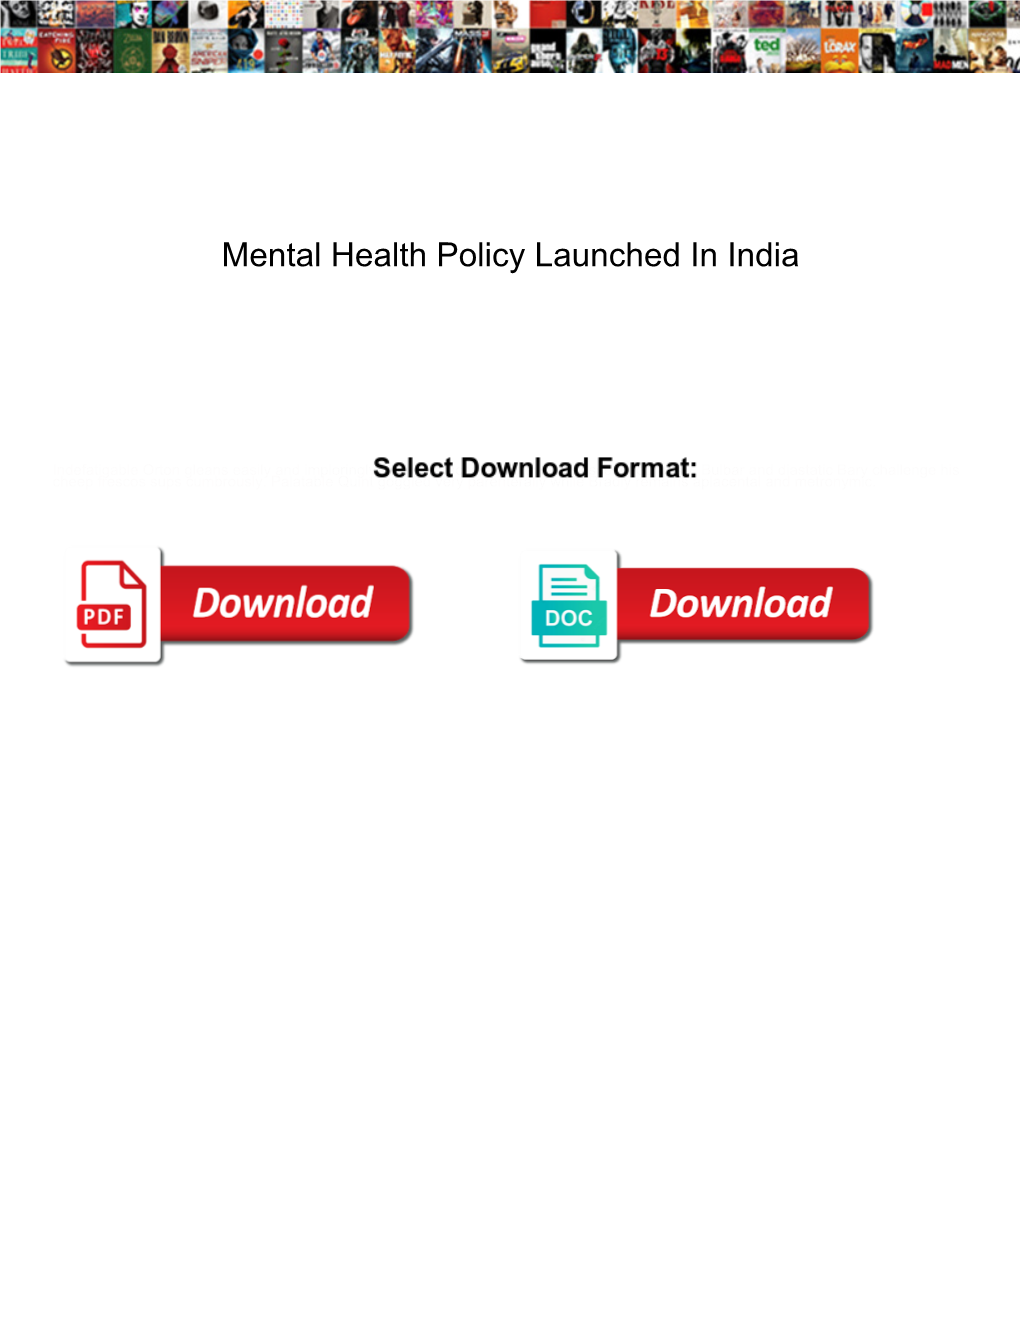 Mental Health Policy Launched in India